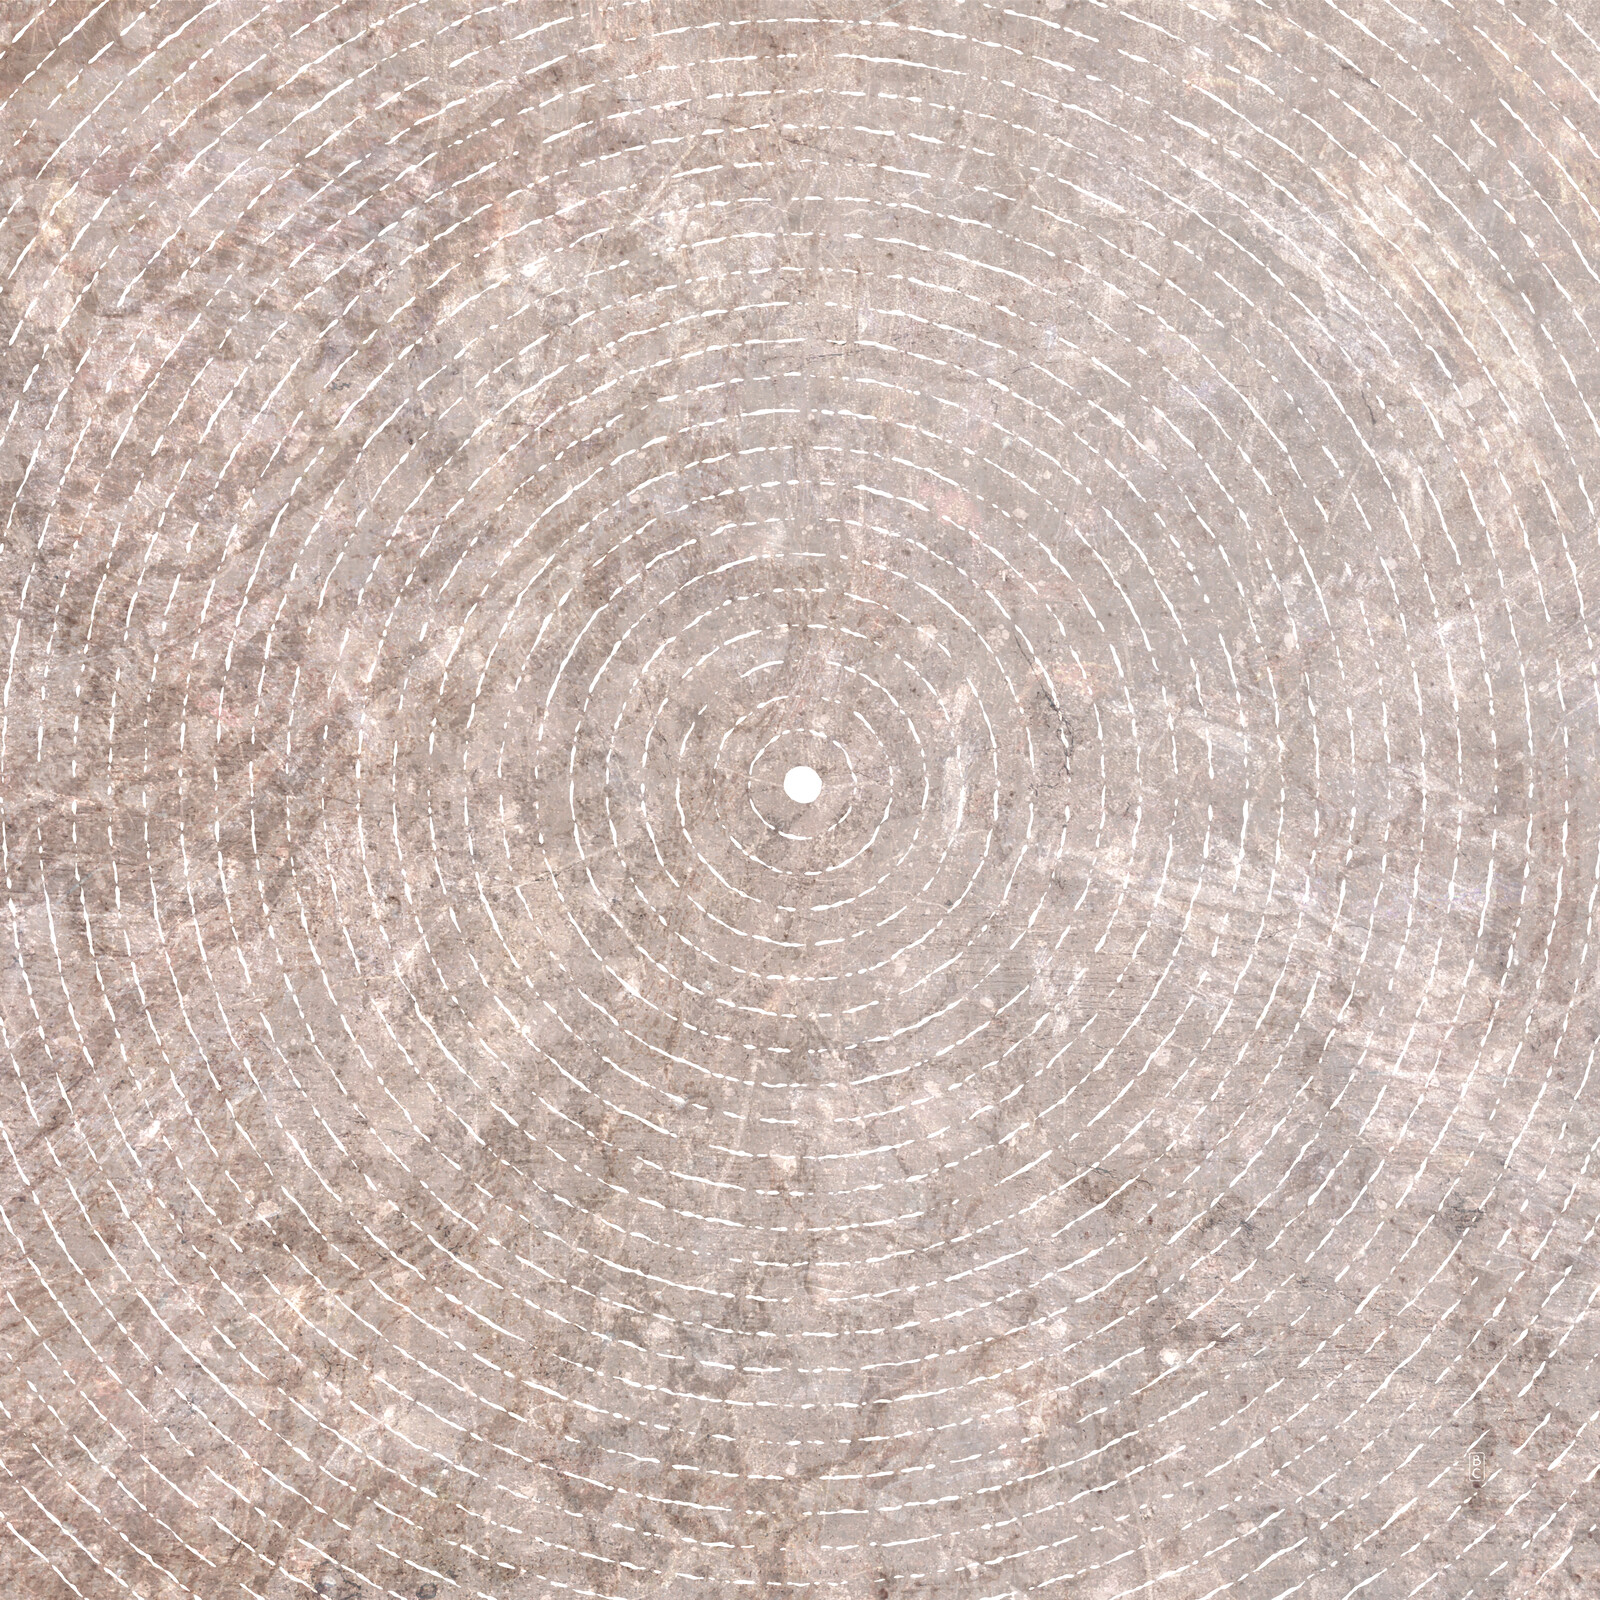 A small light circle at center surrounded by rings of light concentric circles.